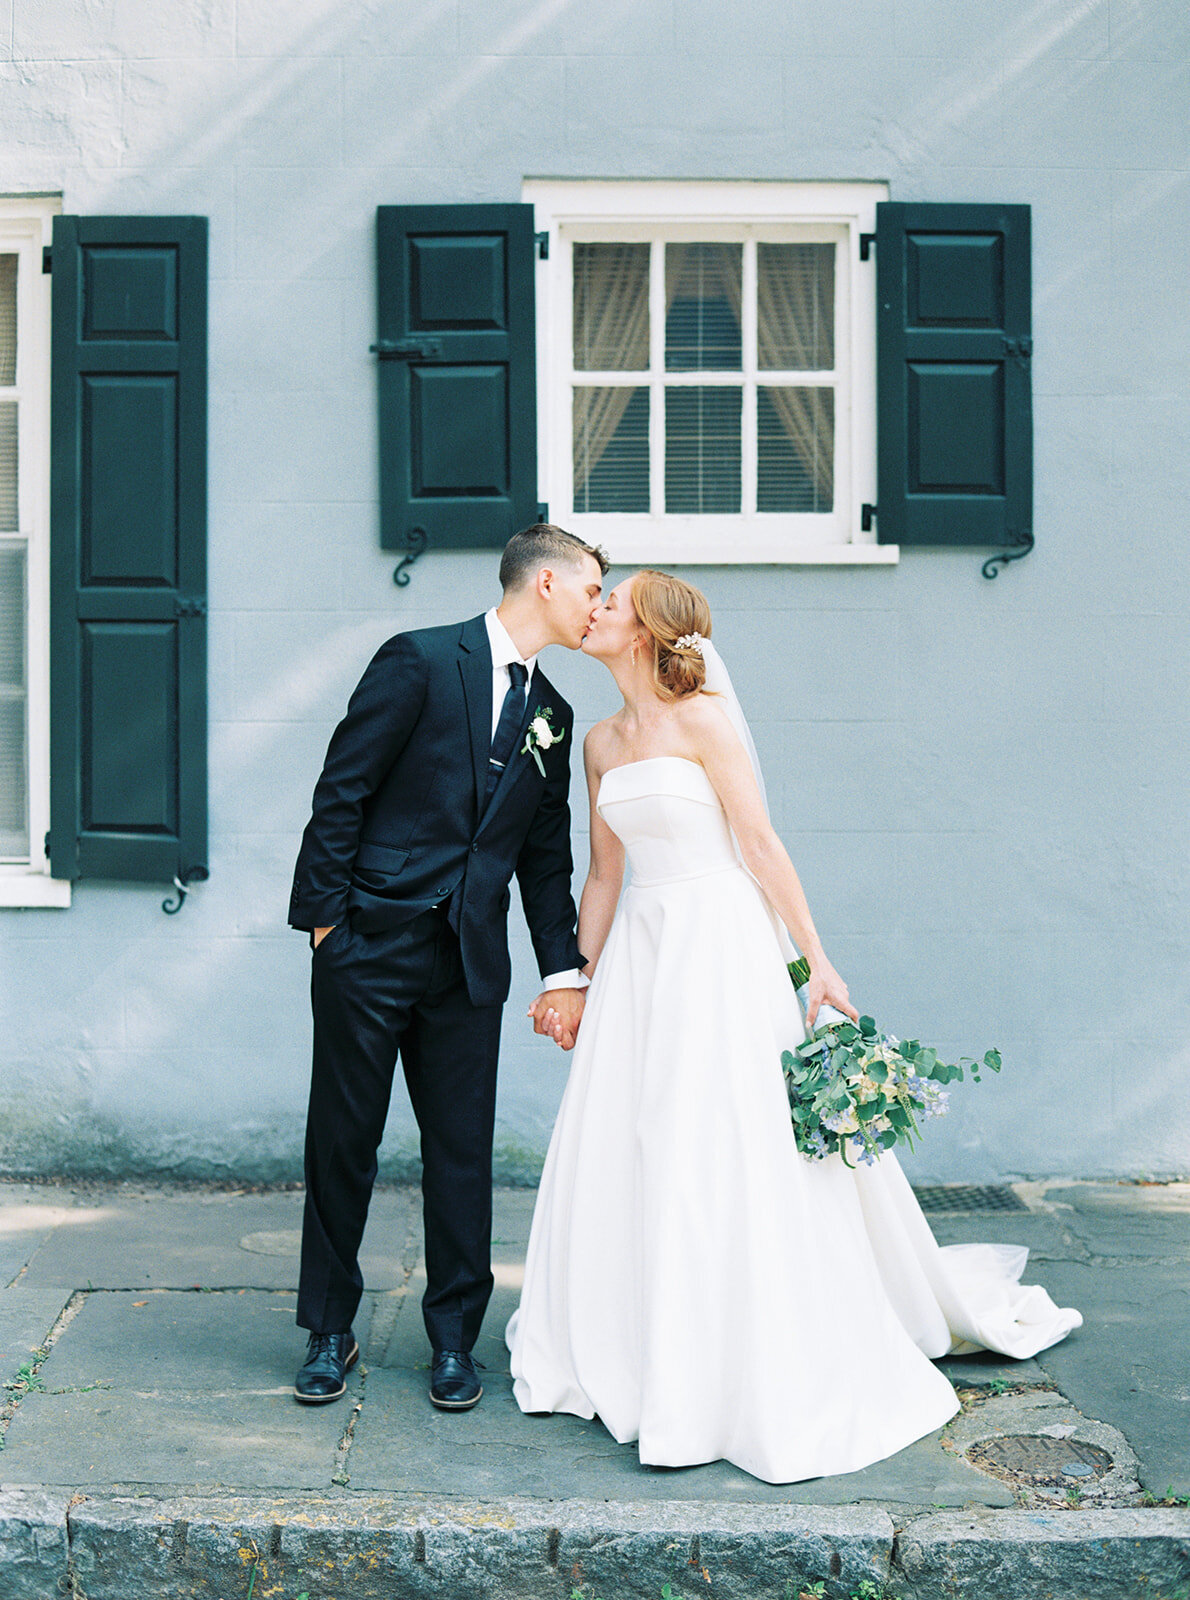 Charleston film wedding photo of bride and groom leaning in for a kiss. Background is light blue Charleston wall.